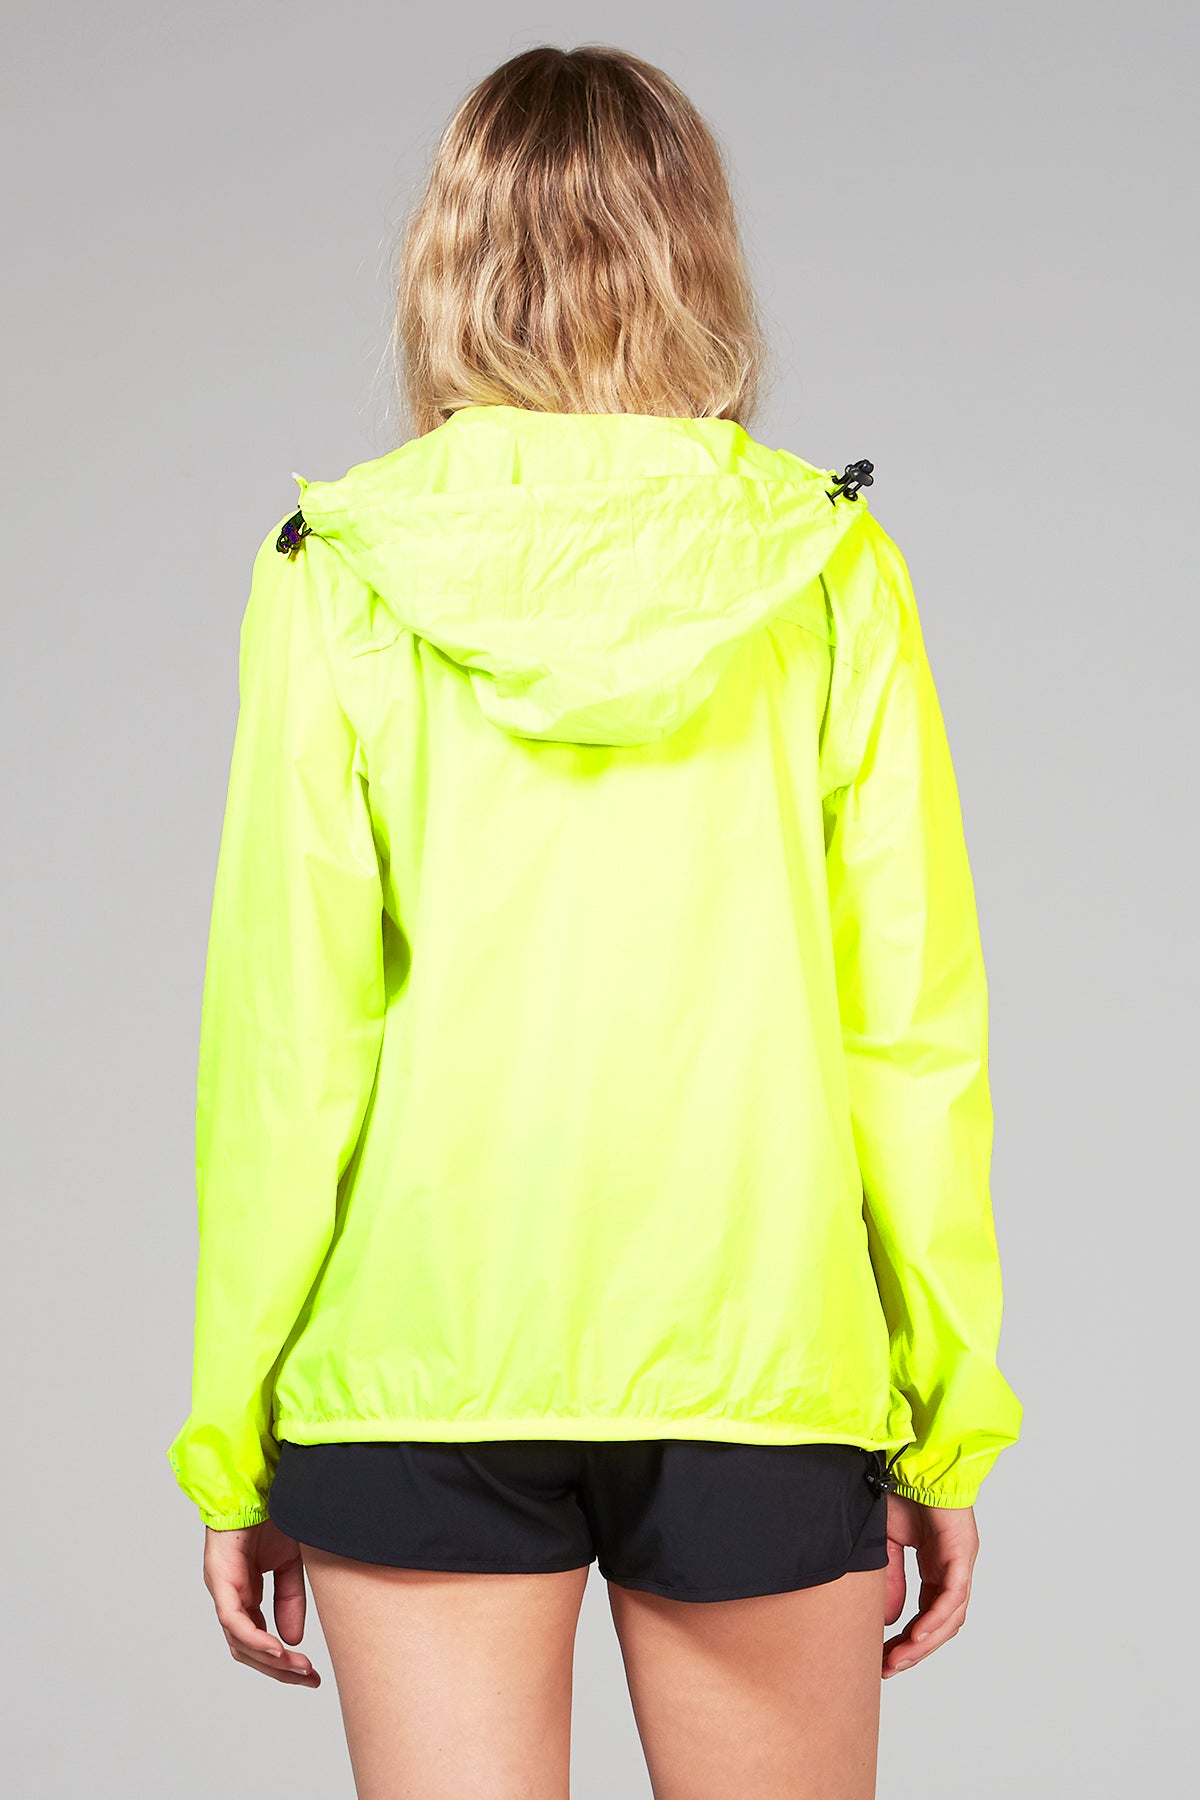 Max - yellow fluo full zip packable rain jacket - O8lifestyle.